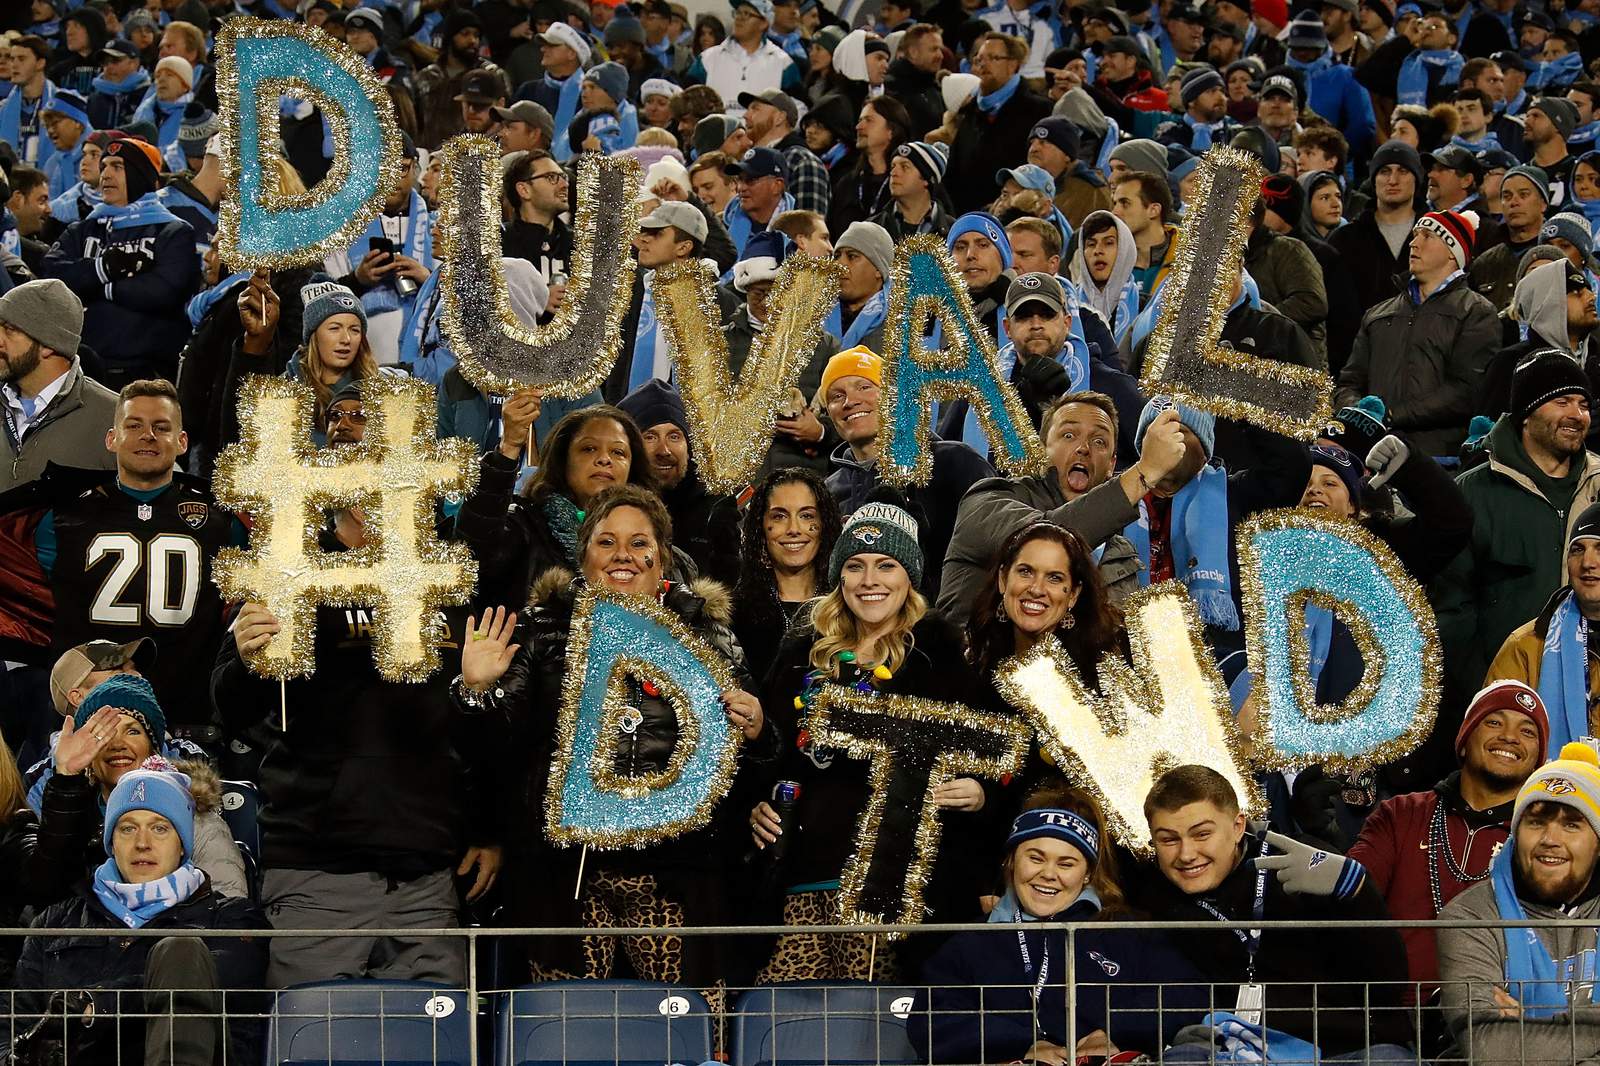 Jaguars fans ranked among fanbases who complain the least in the NFL, study finds